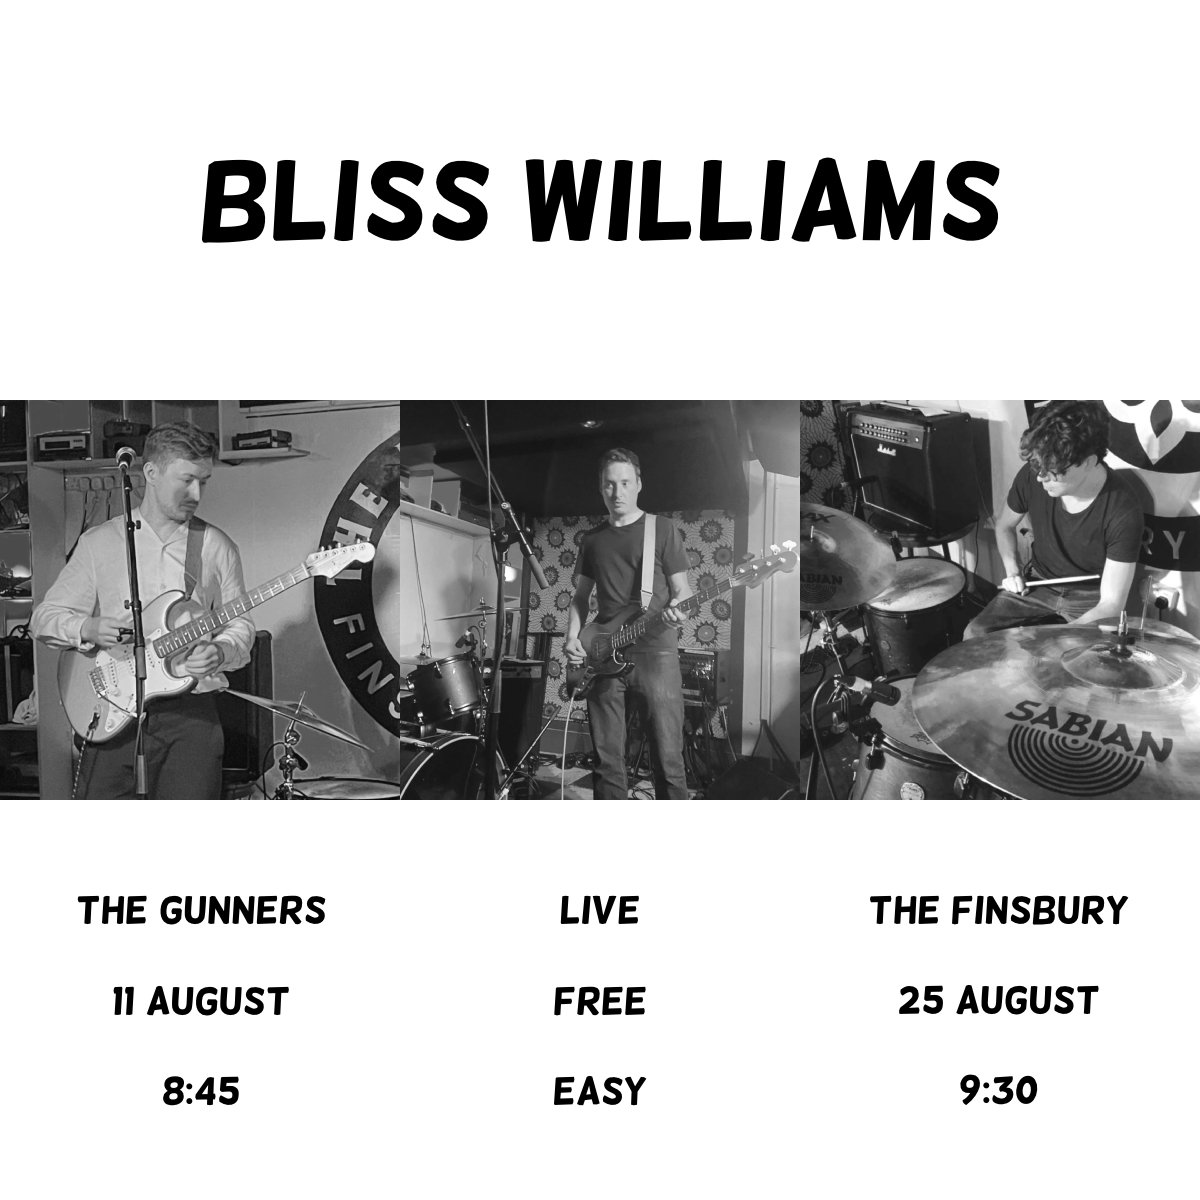 Stage times for our remaining local summer shows! Neither will cost you a penny:
🎙️ 11 August - The Gunners - 8:45
🎸 25 August - The Finsbury - 9:30

#livemusic #gigs #gig #FinsburyPark #whatson #manorhouse #islington #greenlanes #newmusic #NewMusicDaily #IndependentArtist